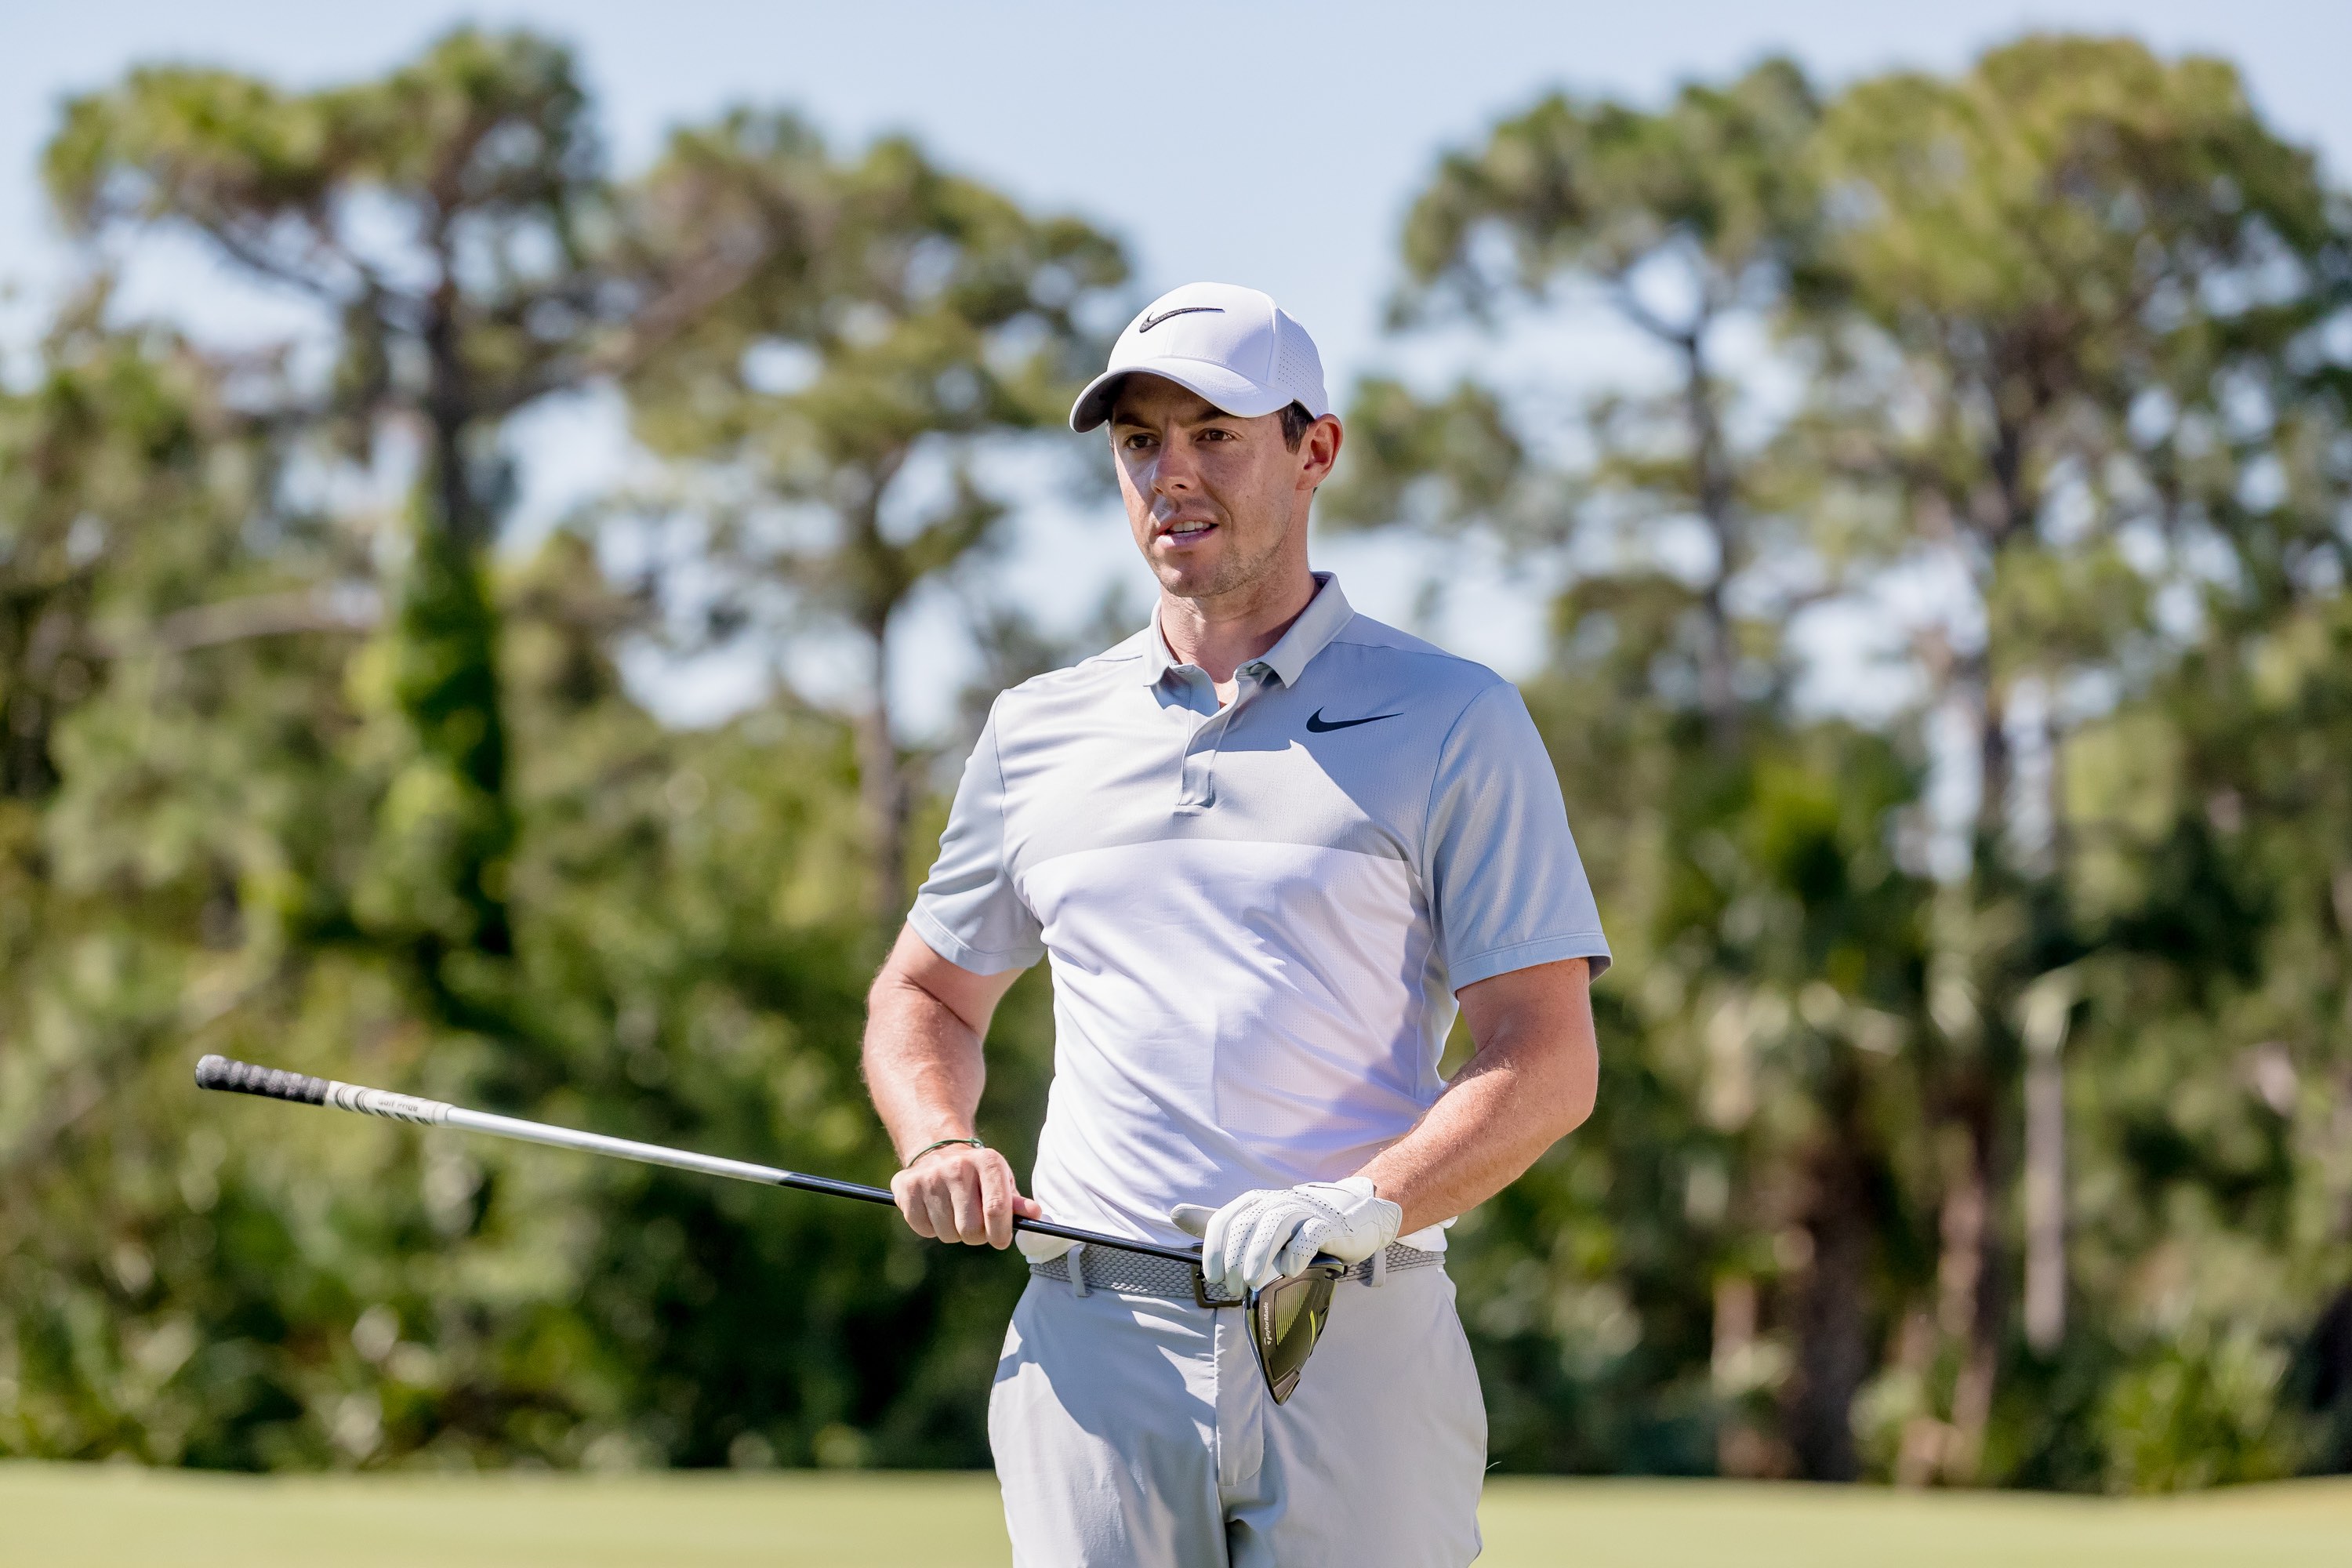 Page 2: Why Rory chose the TP5x golf ball